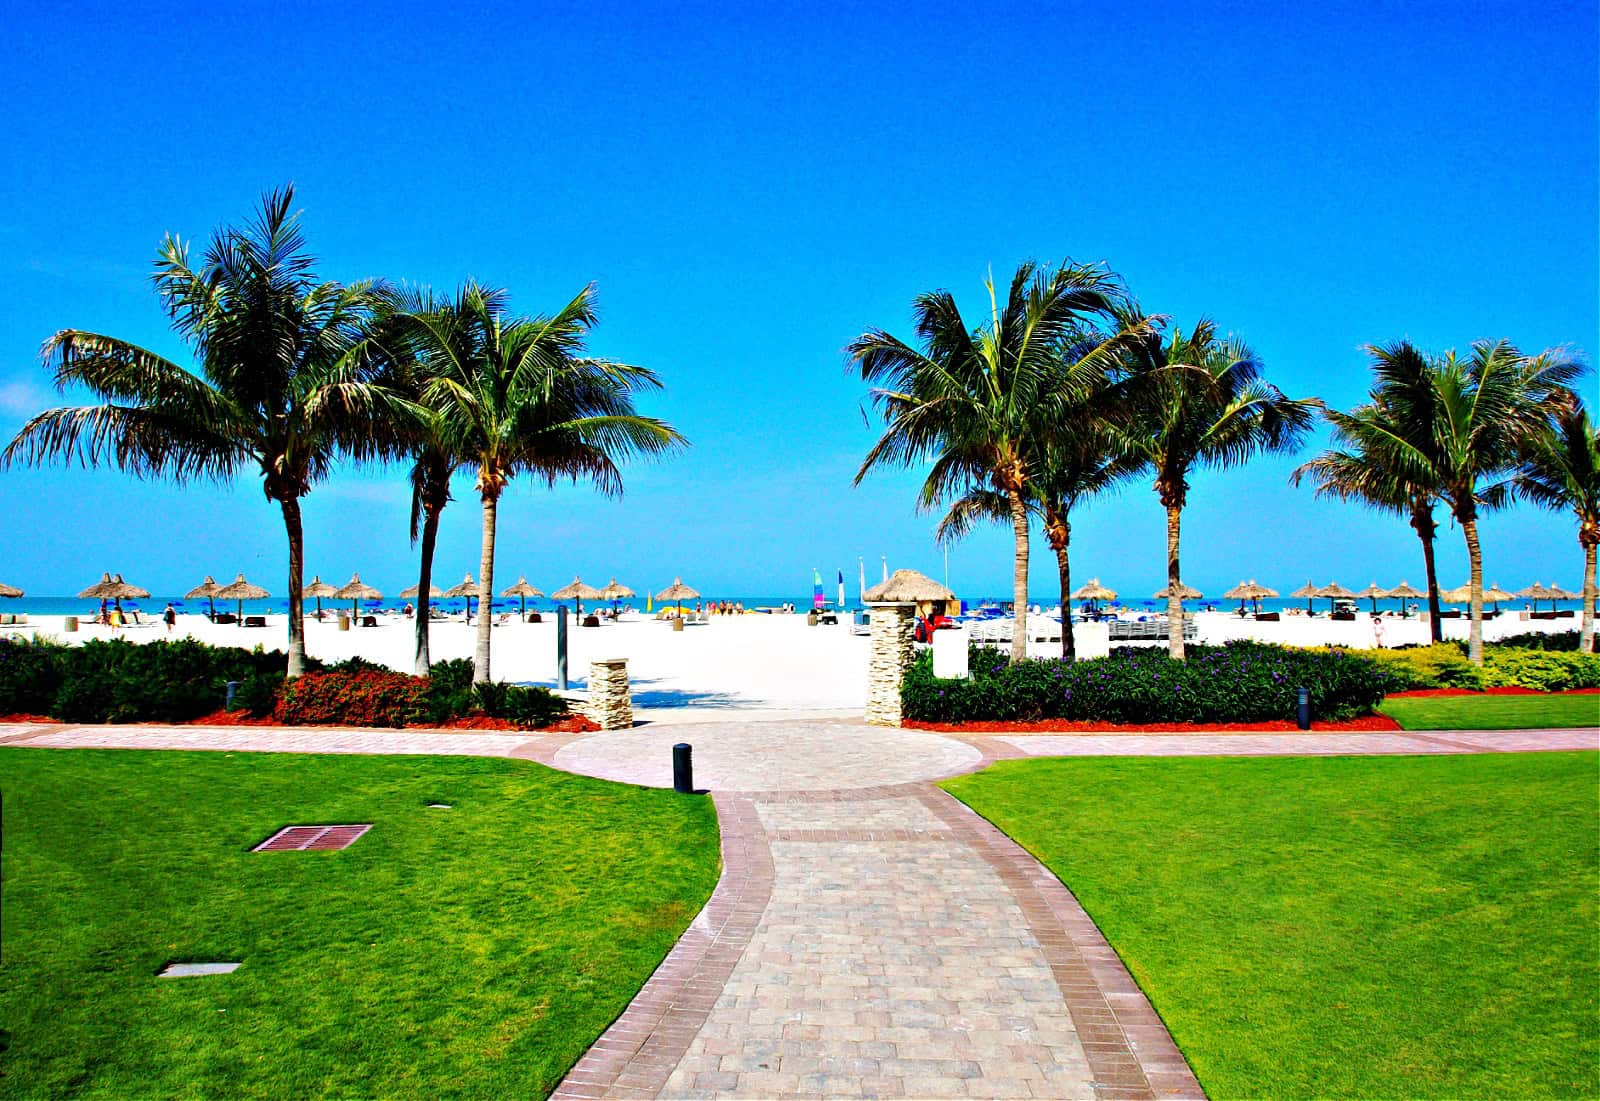 Marco Island, Fl - April 15, 2011. The entrance to the beach from the Marriott Hotel.